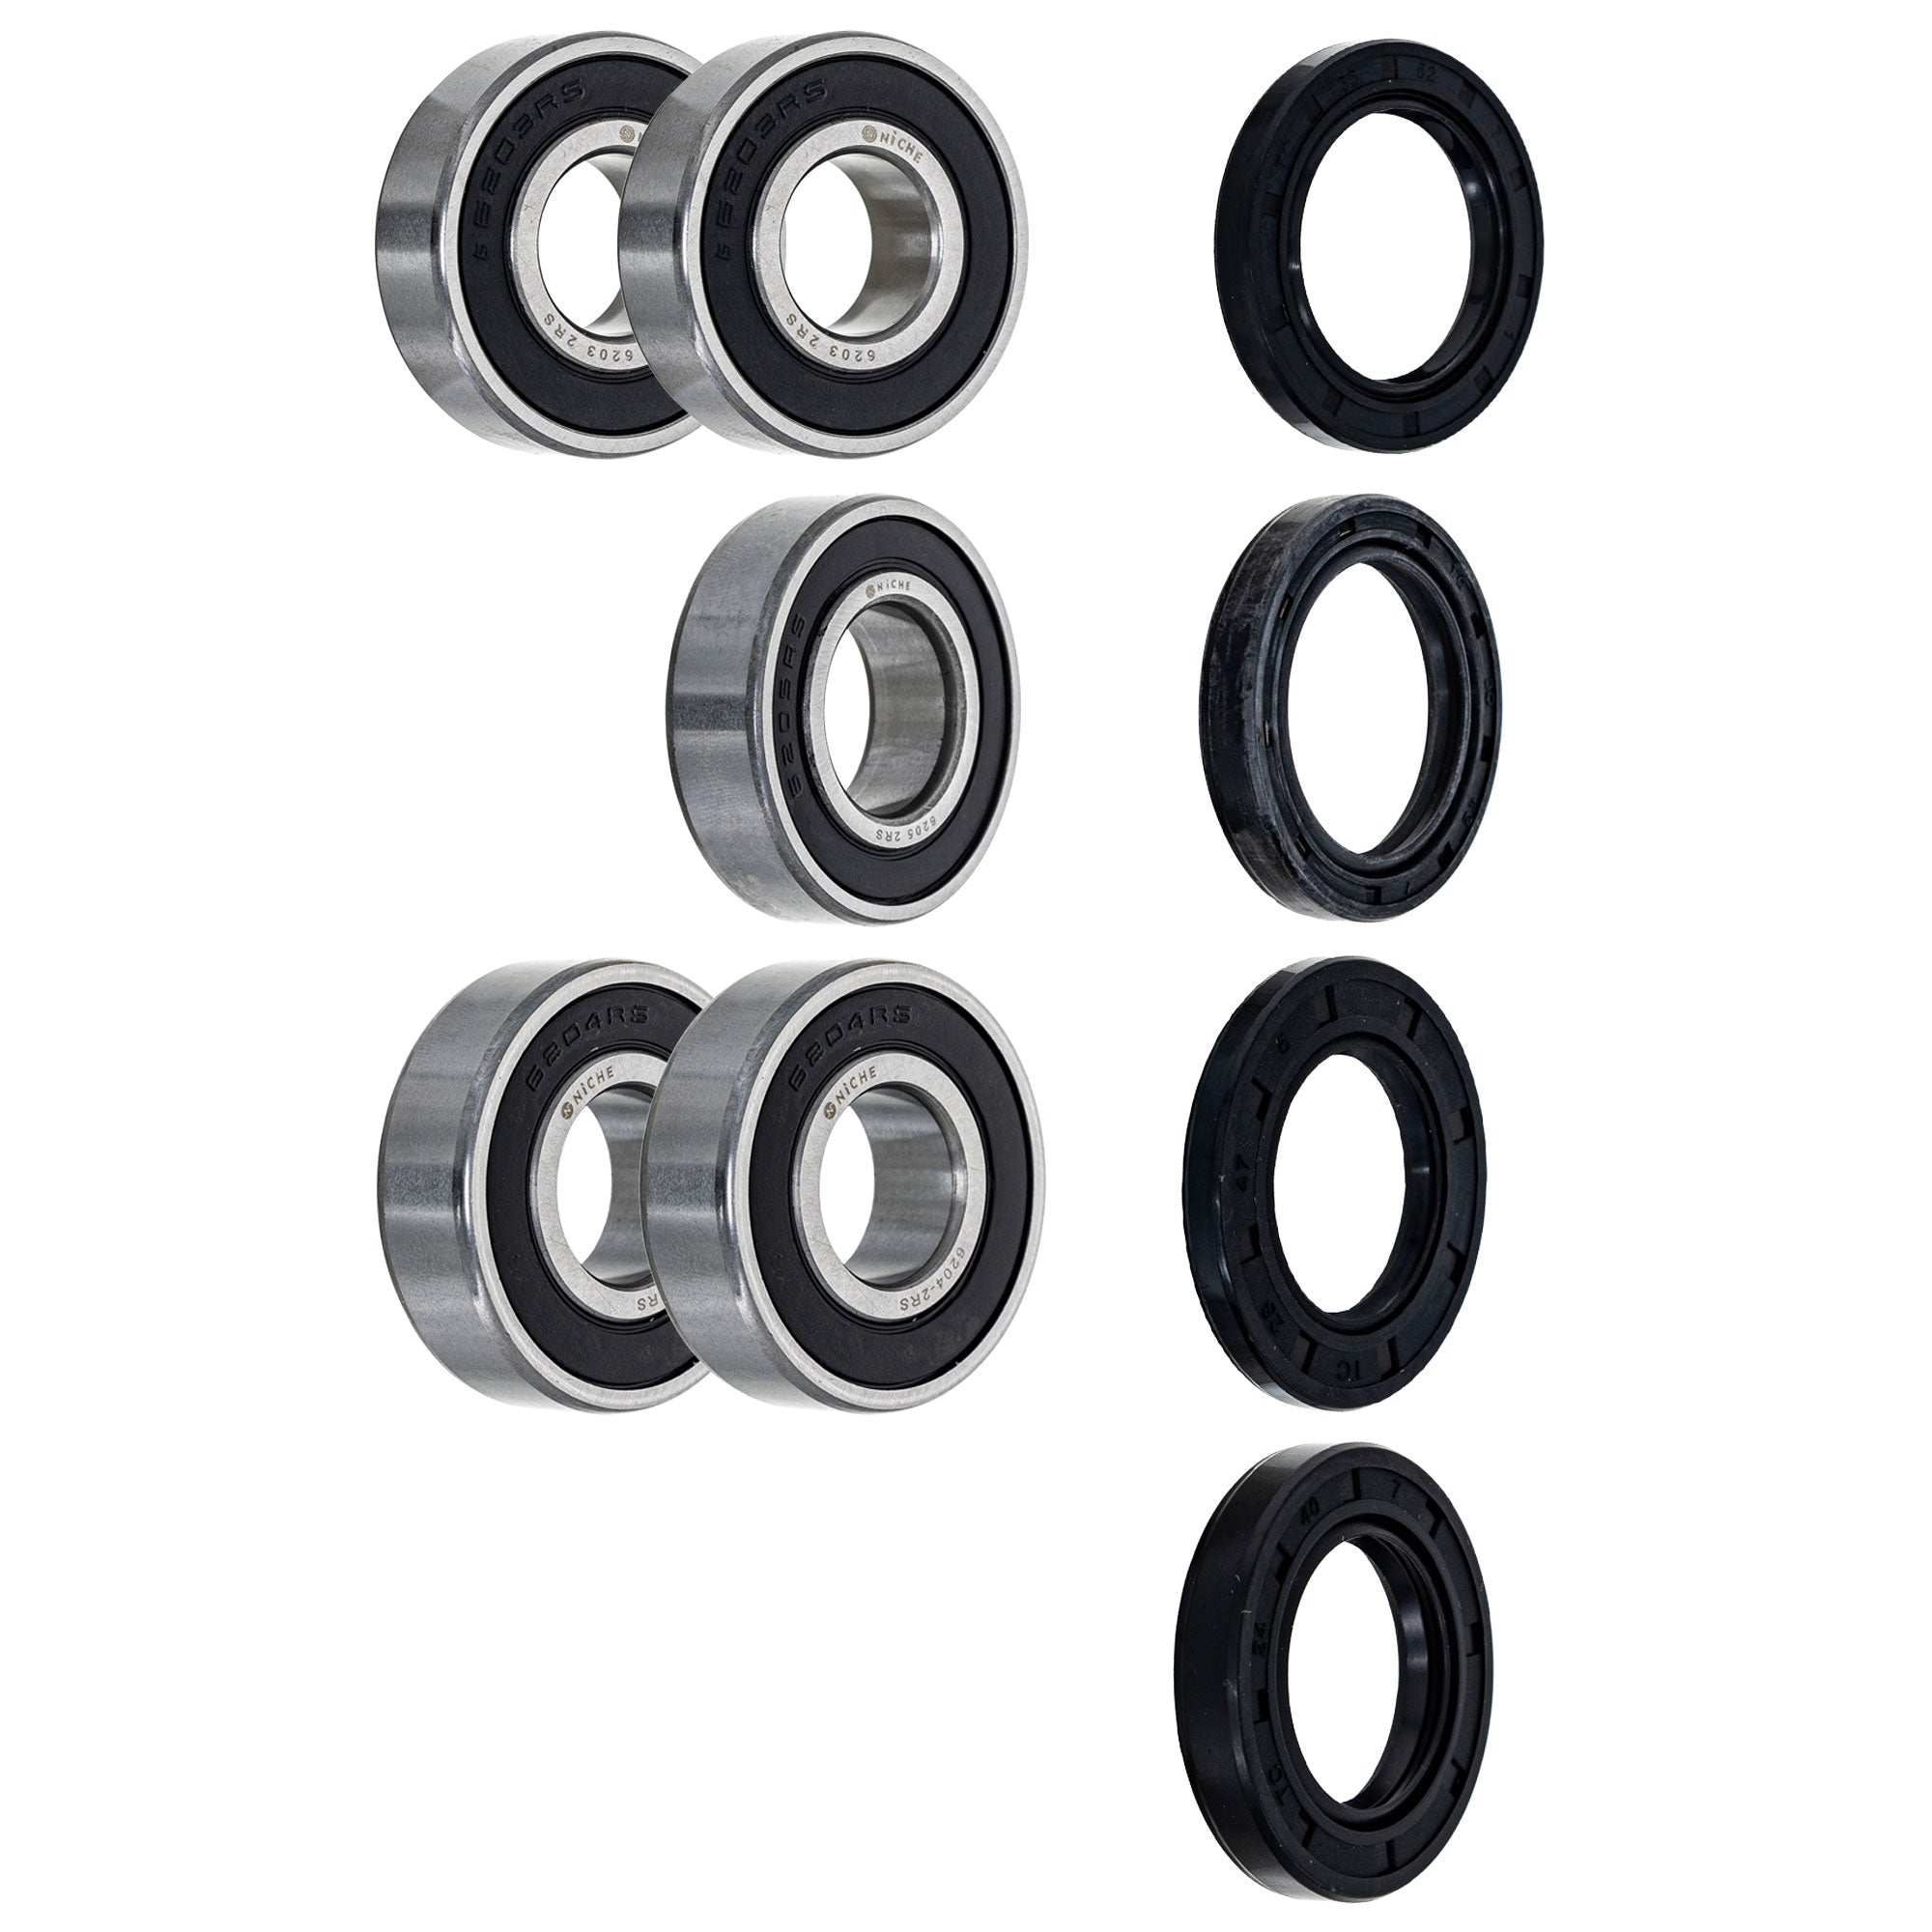 Wheel Bearing Seal Kit for zOTHER Ref No ZR7S NICHE MK1008552